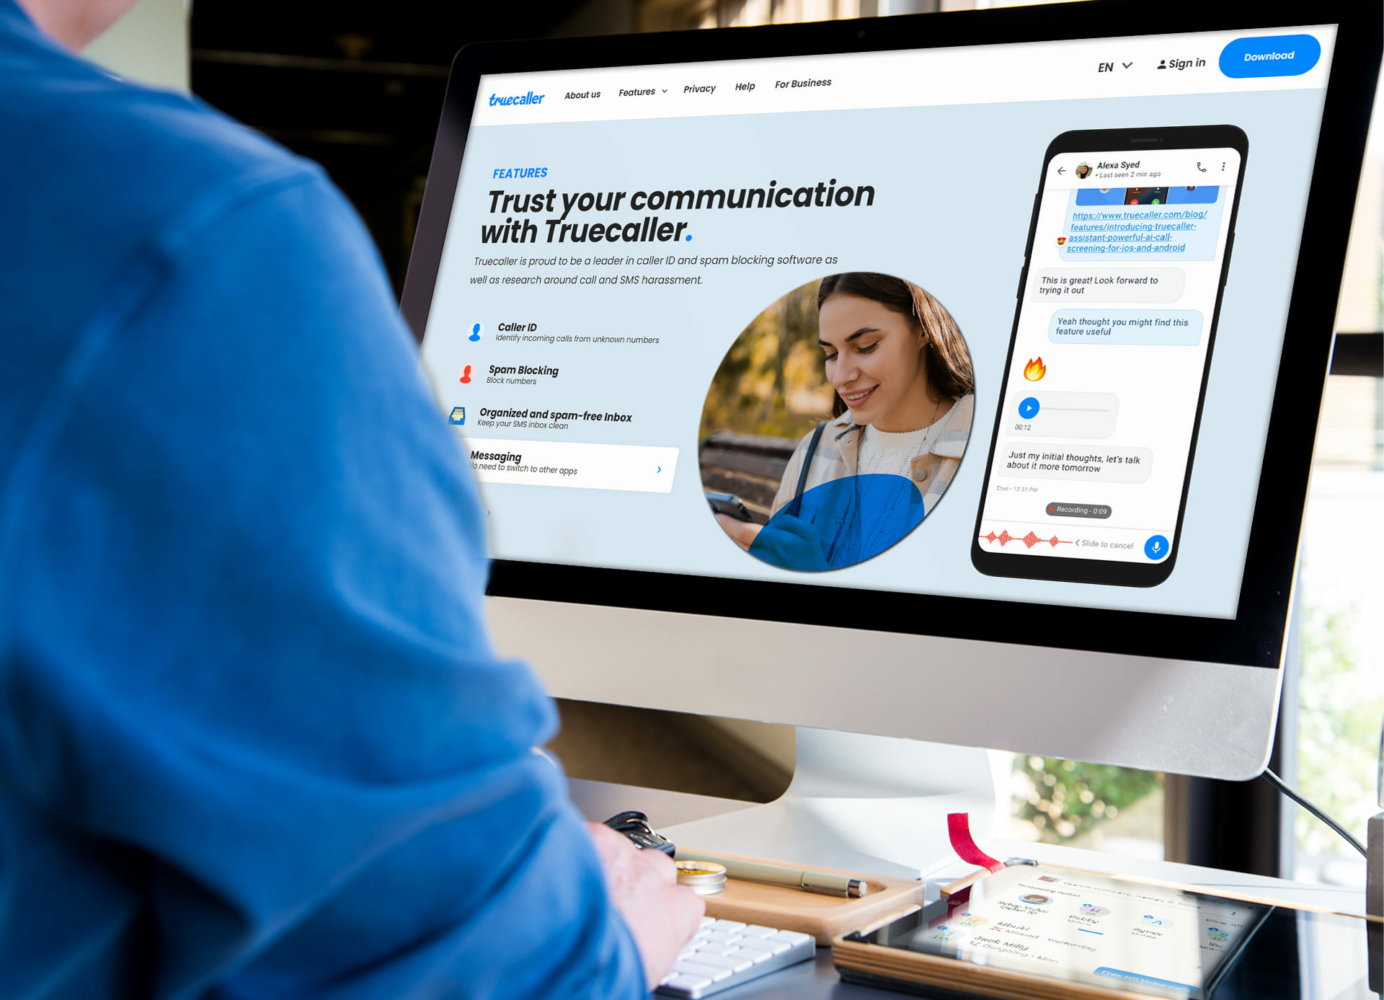 On the computer, the Truecaller website page is open with the functions it provides